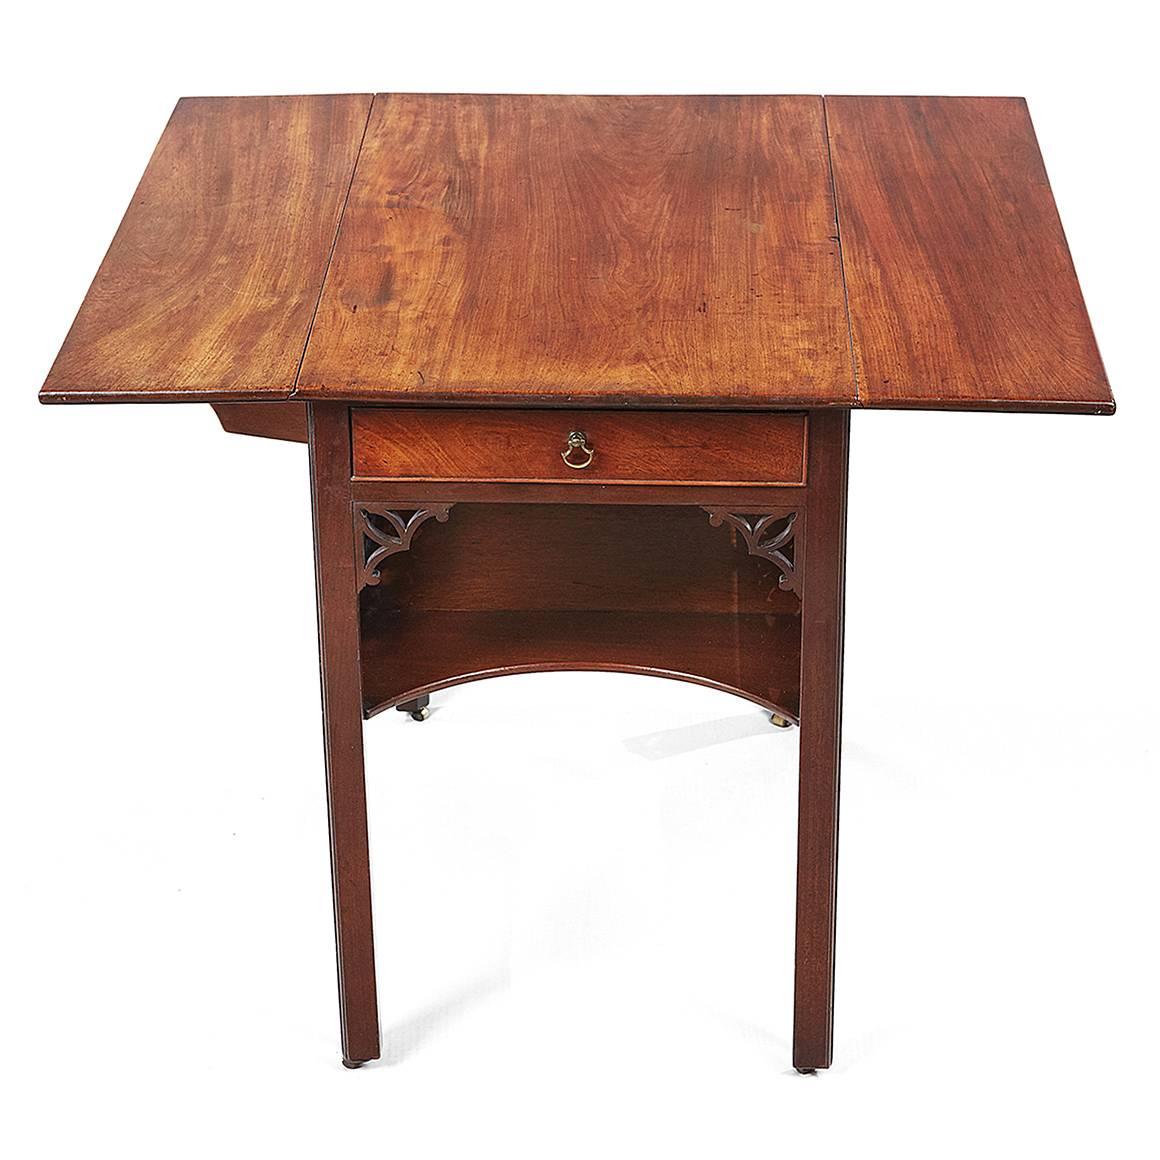 18th century Chippendale mahogany Pembroke table. The top with moulded edge and drop leaves raised above single frieze drawer with brass pull above concave lower shelf, intricate fretwork throughout, terminating on chamfered leg with brass